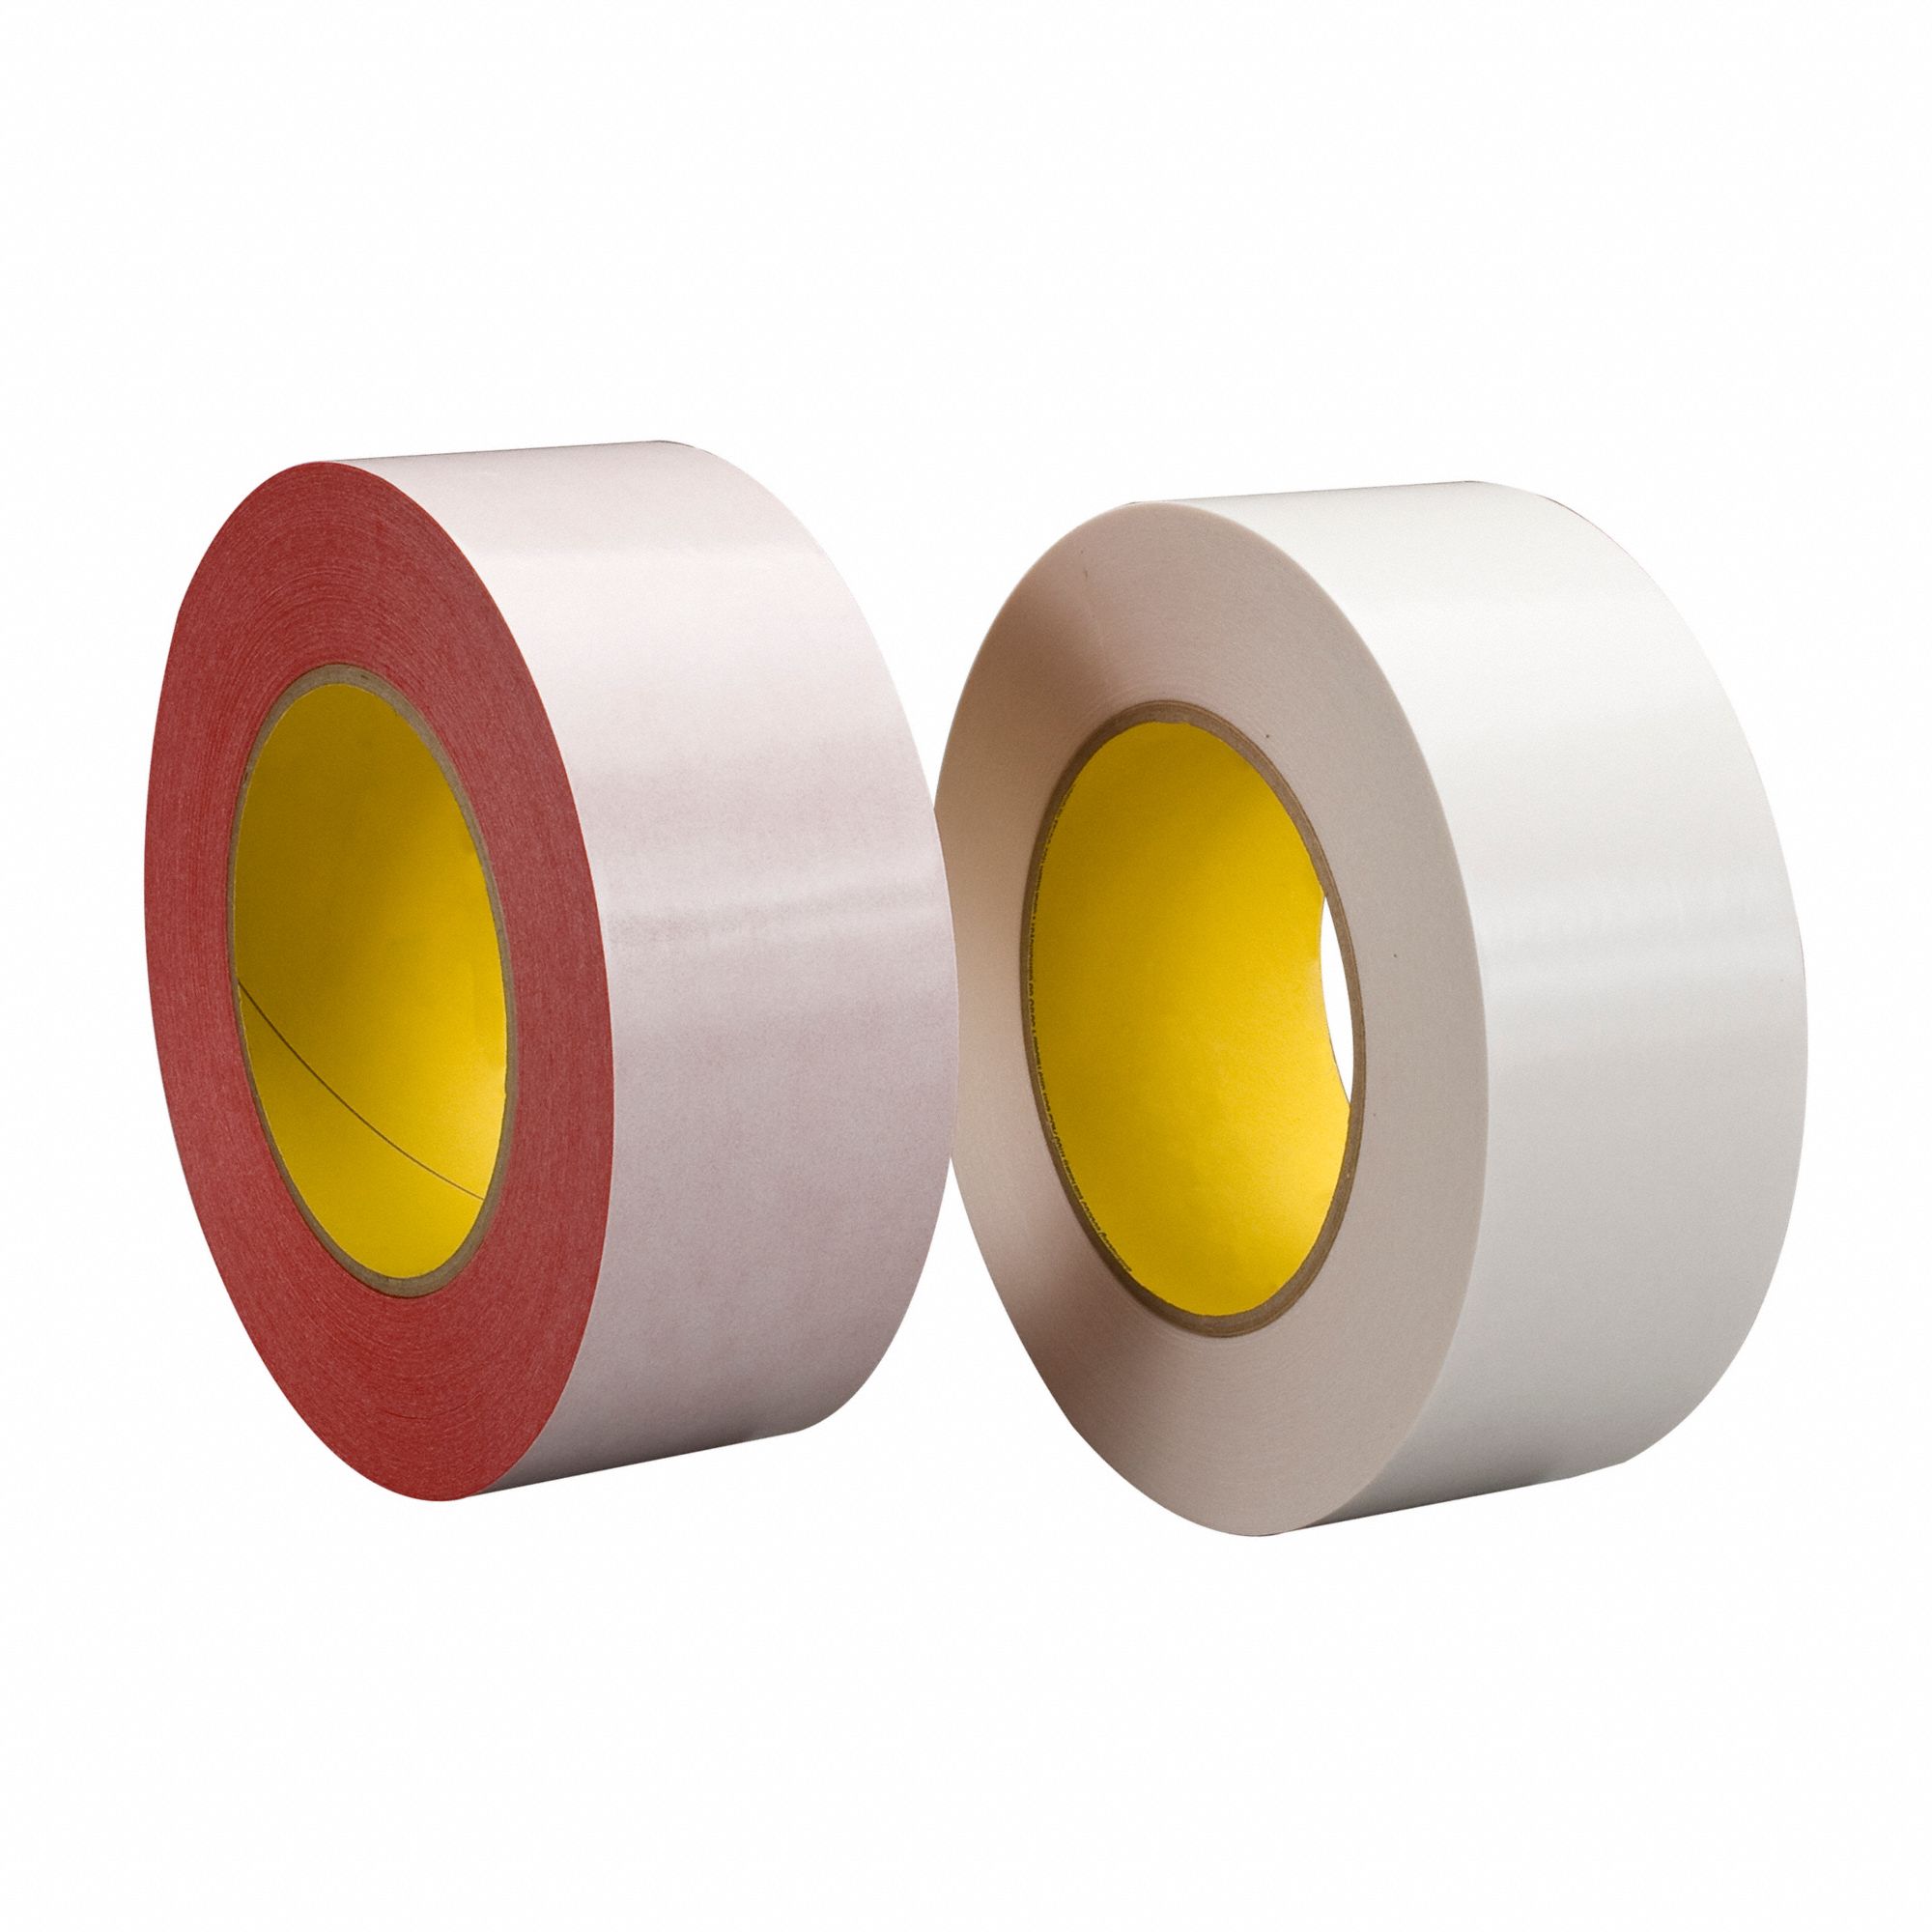 3M Permanent Double Sided Tape